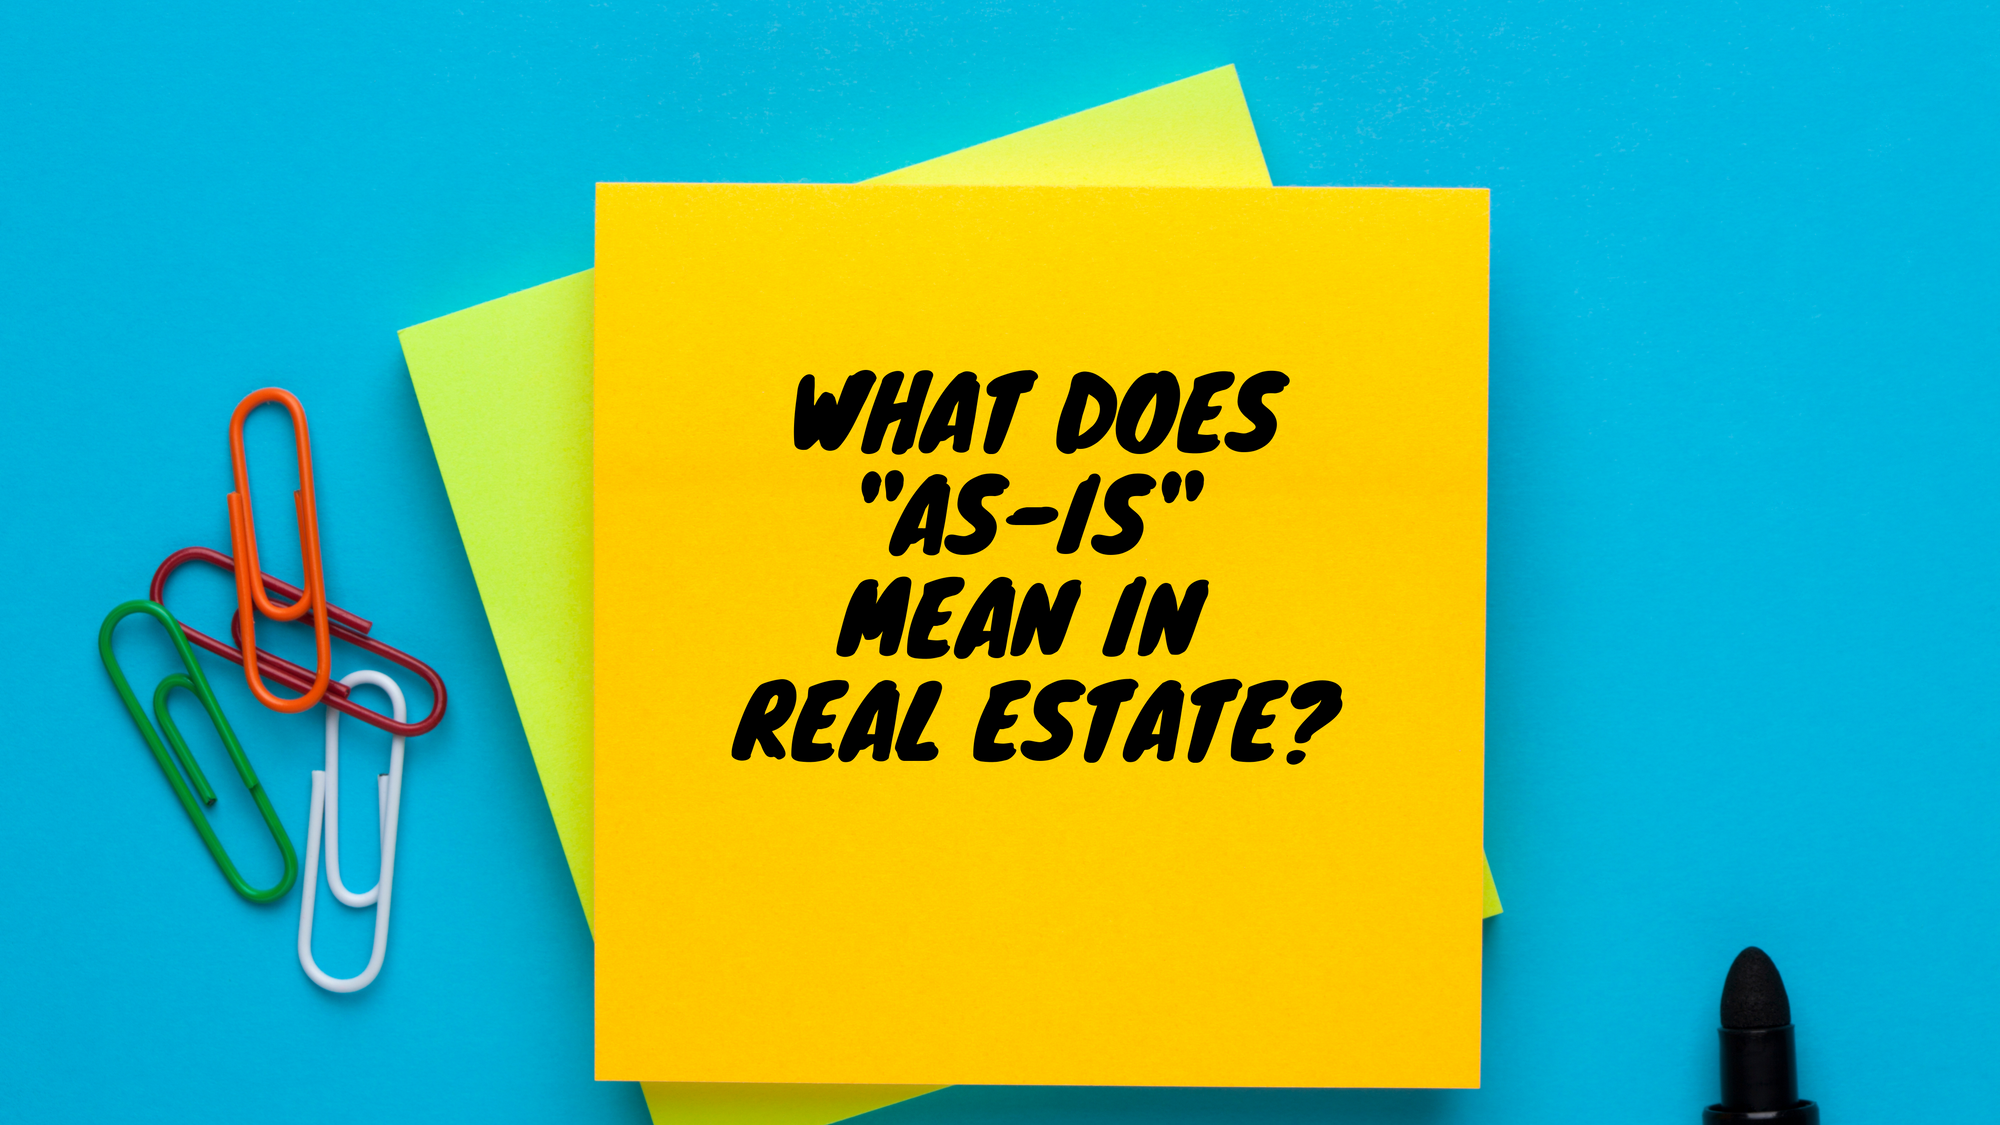 What Does "As-Is" Mean in Real Estate?